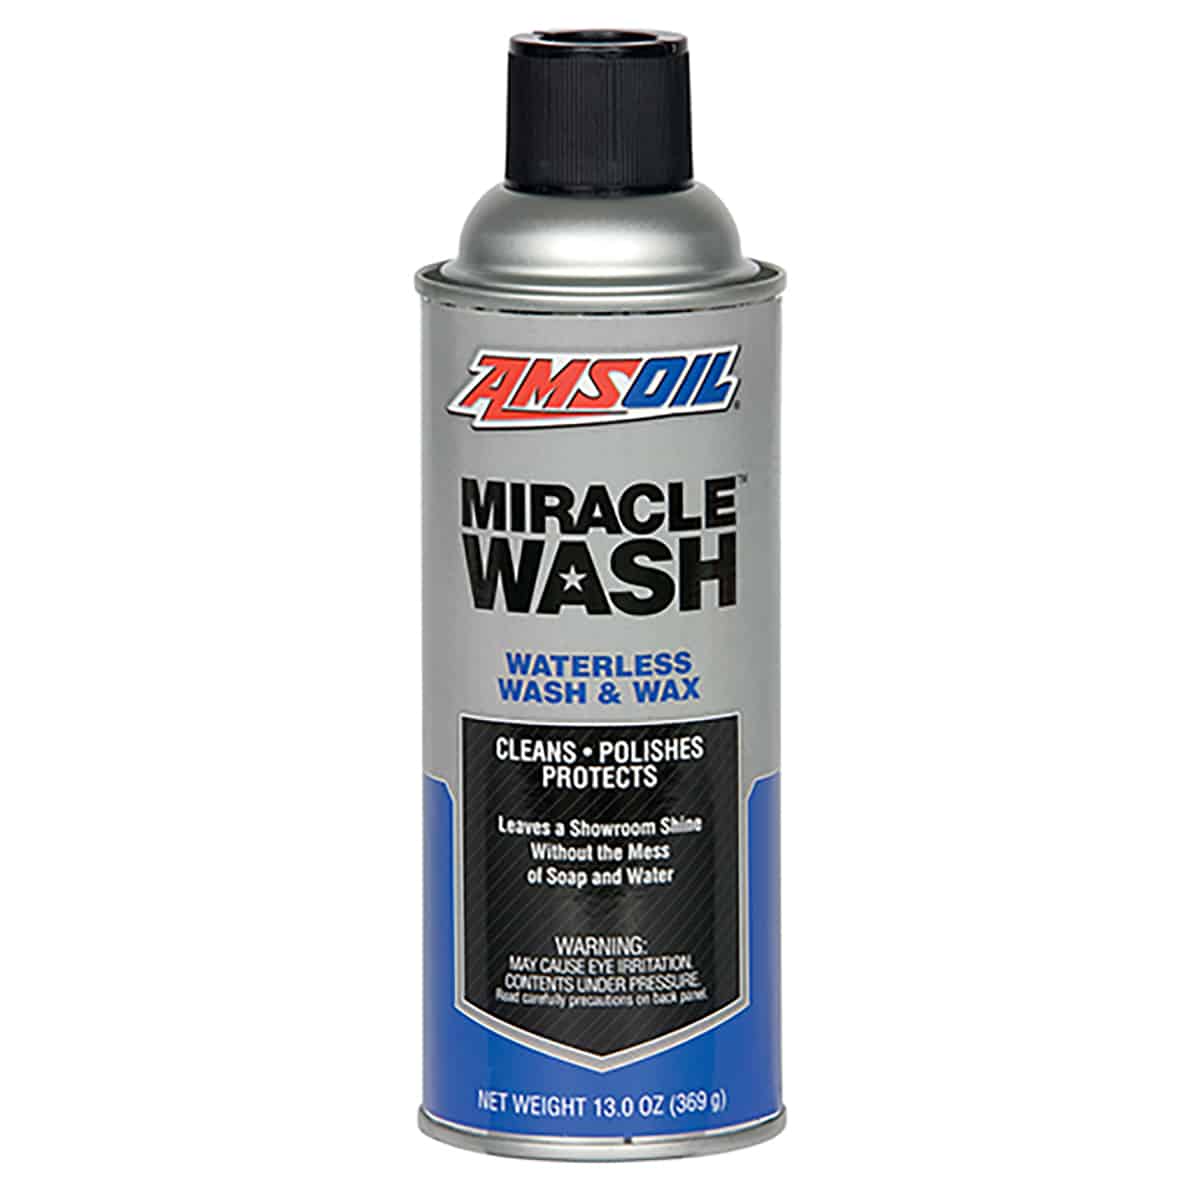 A can of AMSOIL Waterless Wash & Wax, which provides vehicles with a fantastic shine and super-tough protective finish in just two easy steps – spray and wipe.